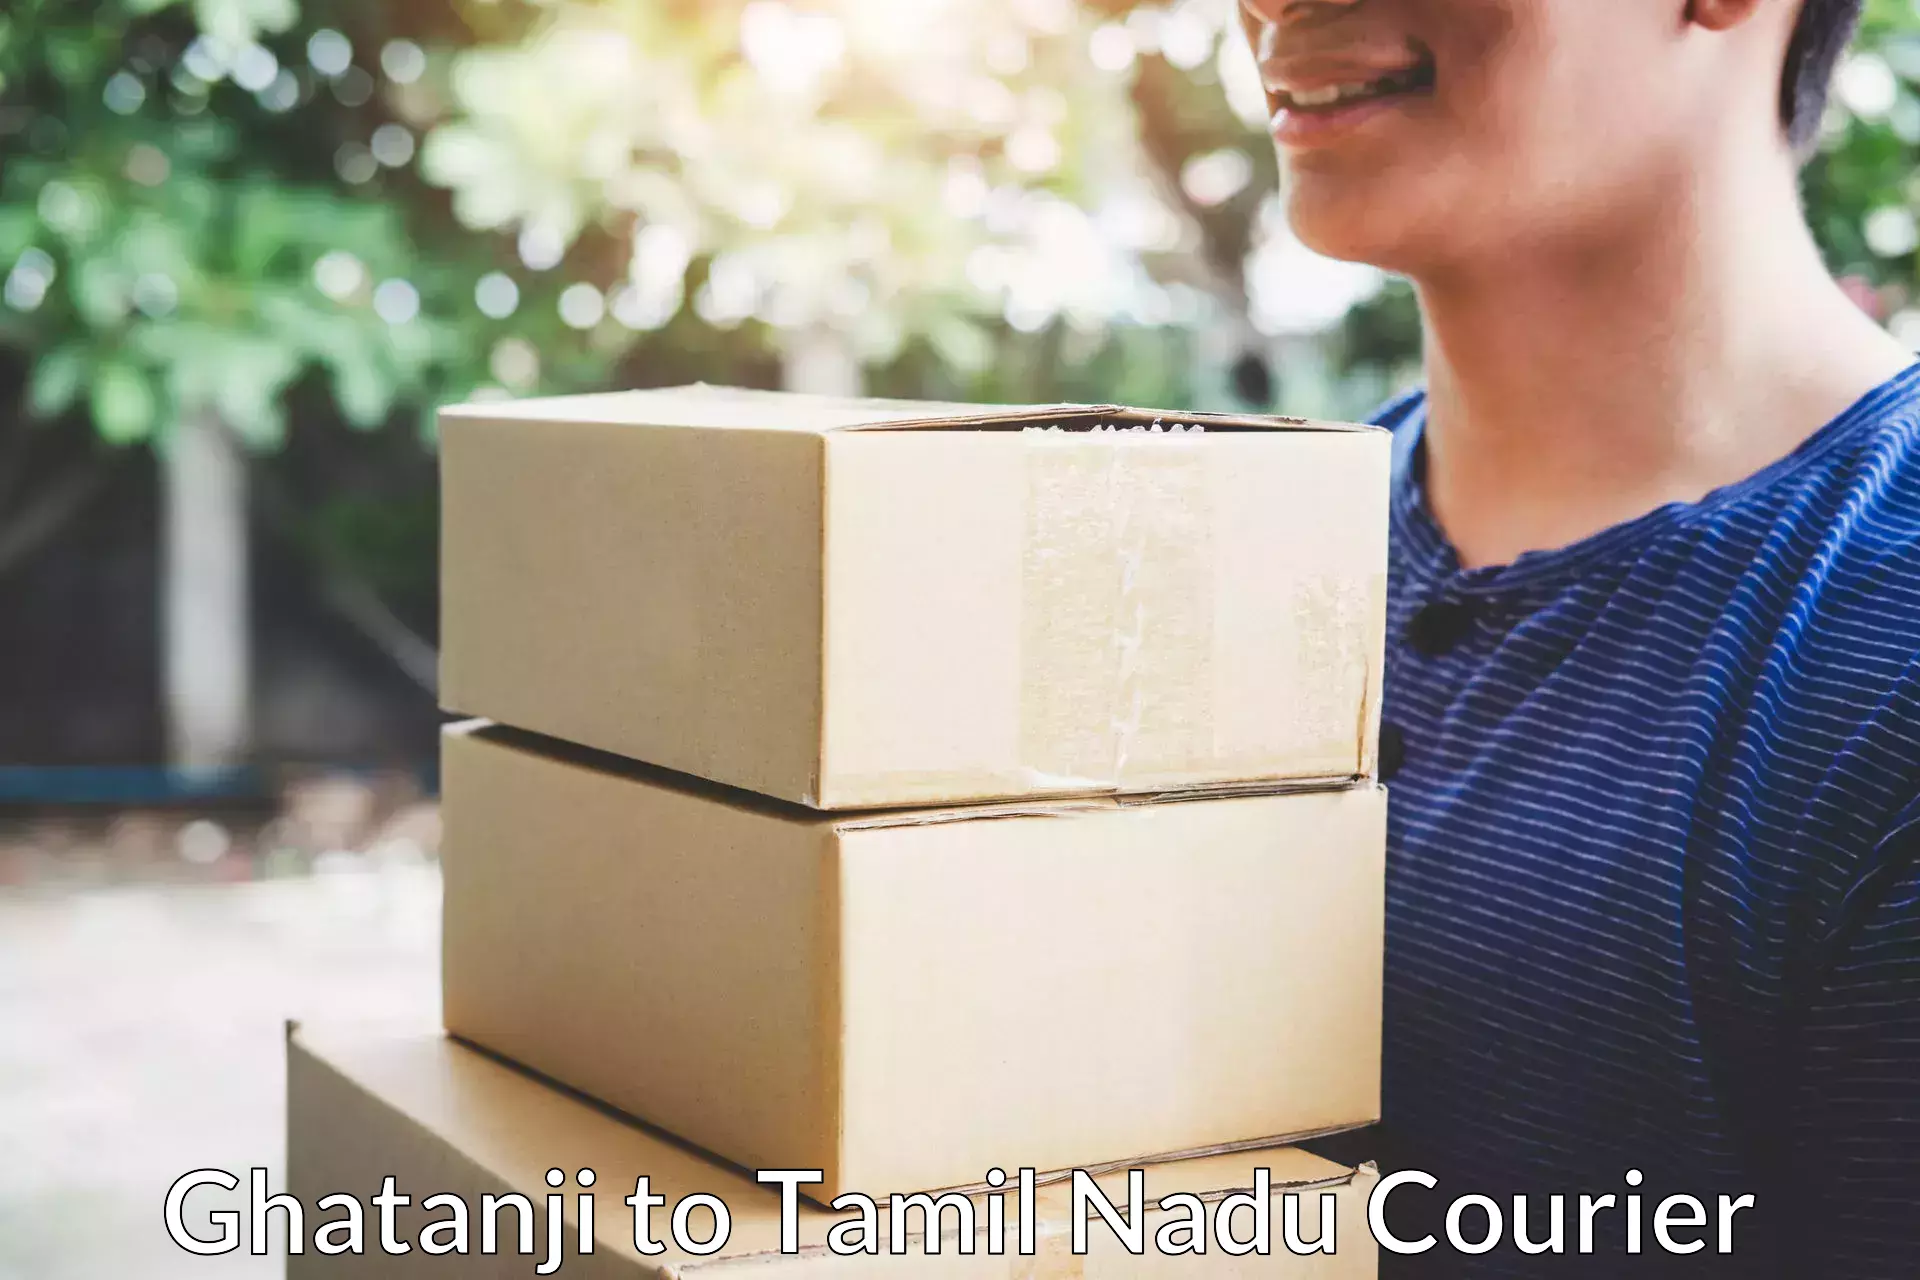 Hassle-free relocation Ghatanji to Thuraiyur